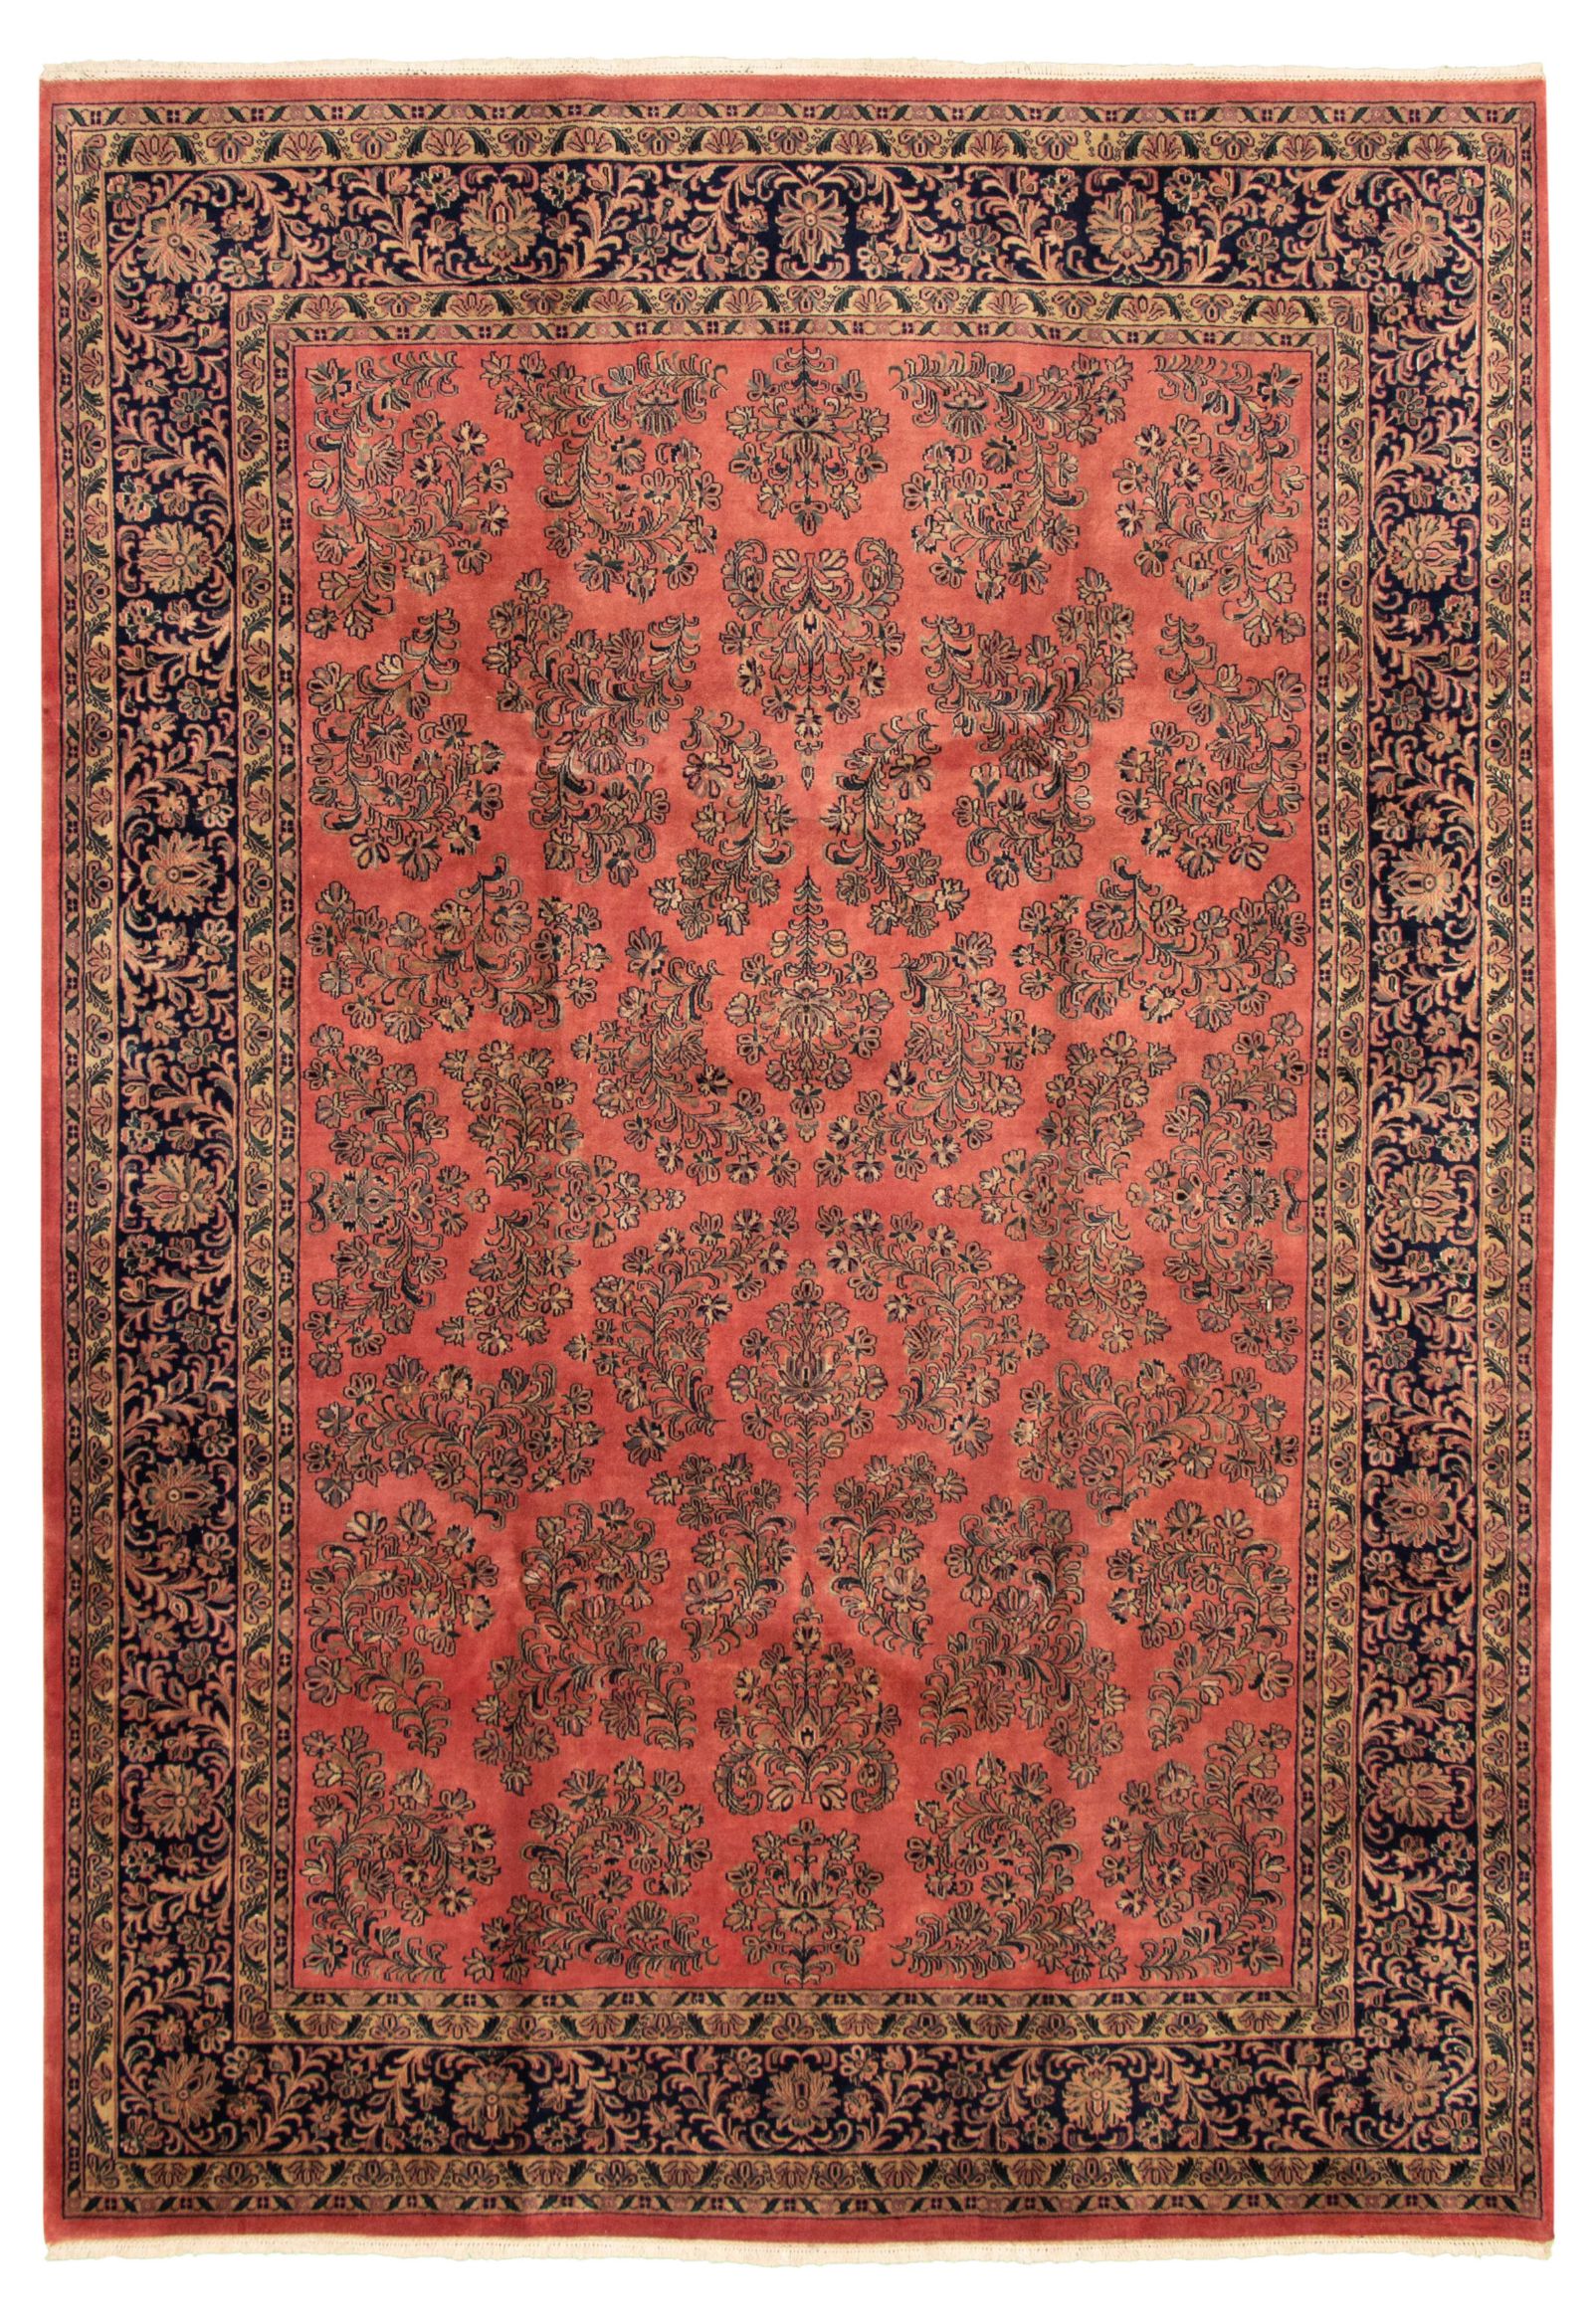 Hand-knotted Royal Sarough Dark Pink Wool Rug 7'11" x 11'5" Size: 7'11" x 11'5"  